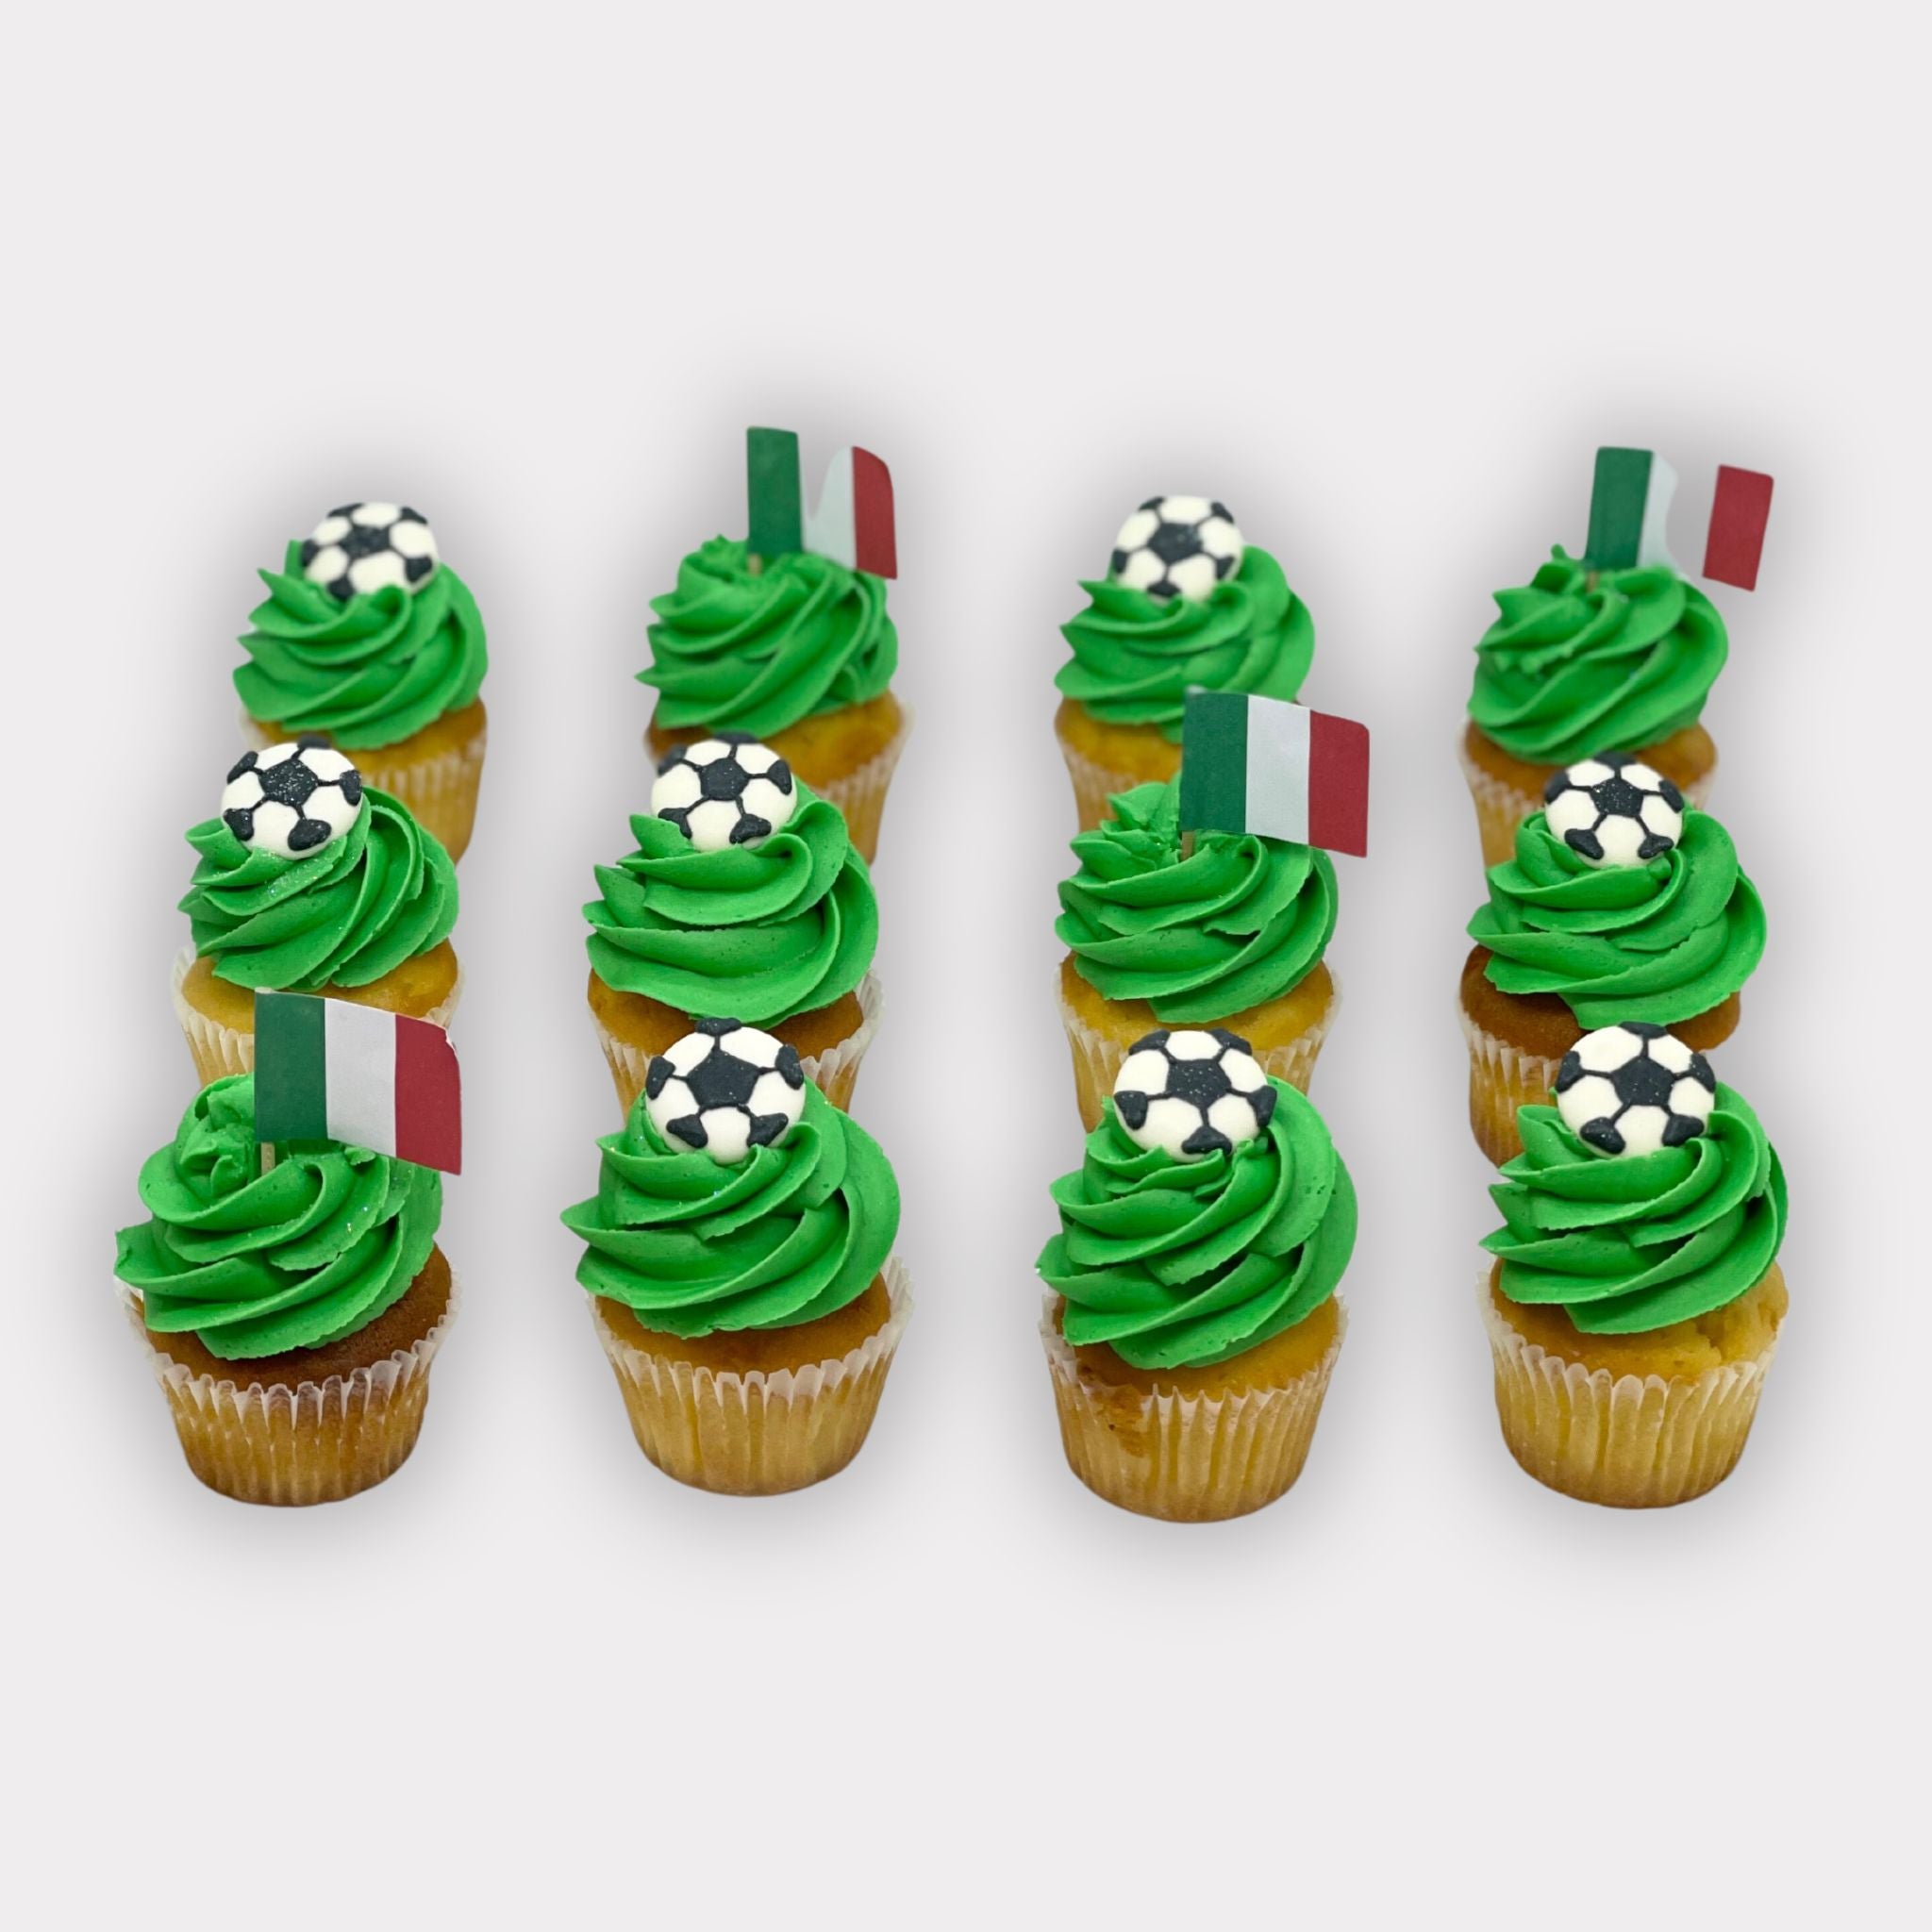 FIFA Women's World Cup Cupcakes